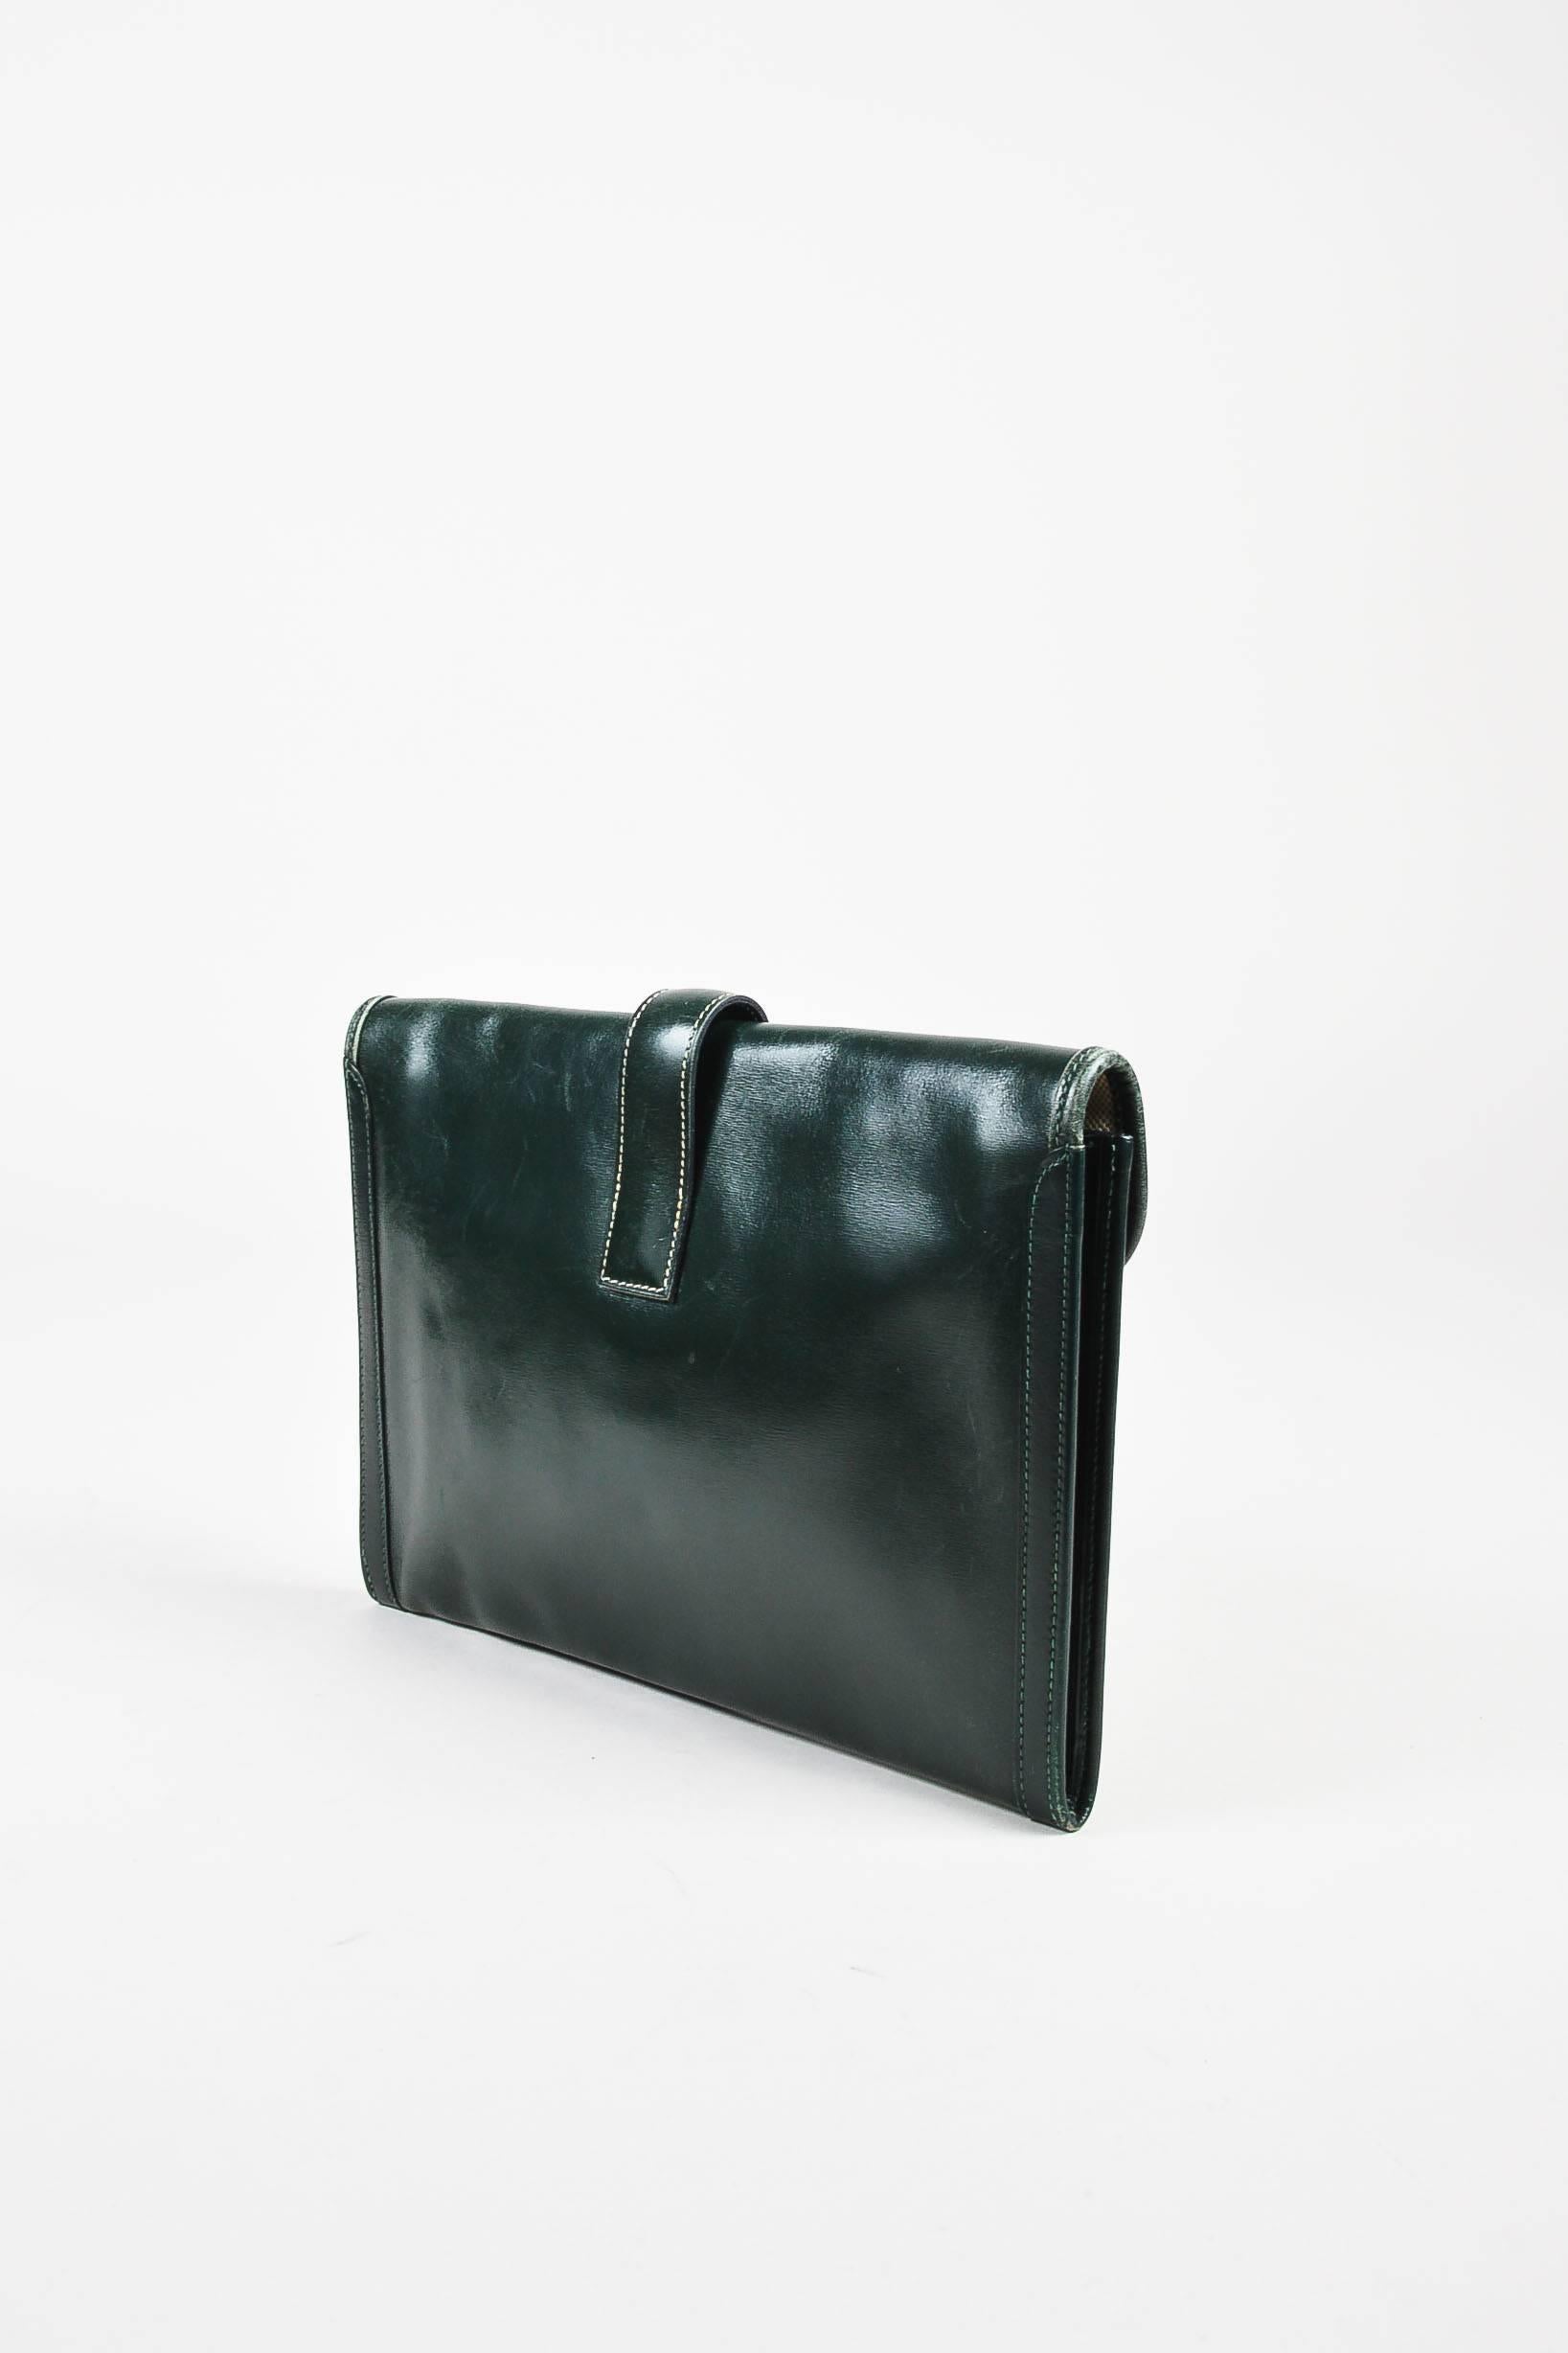 Color: Green
Made In: France
Fabric Content: Leather

Item Specifics & Details: Vintage hunter Green envelope "Jige PM" clutch by Hermes. 'H' detail on front of clutch with tuck-strap closure. Circa 1984.
Measurements*:
Height: